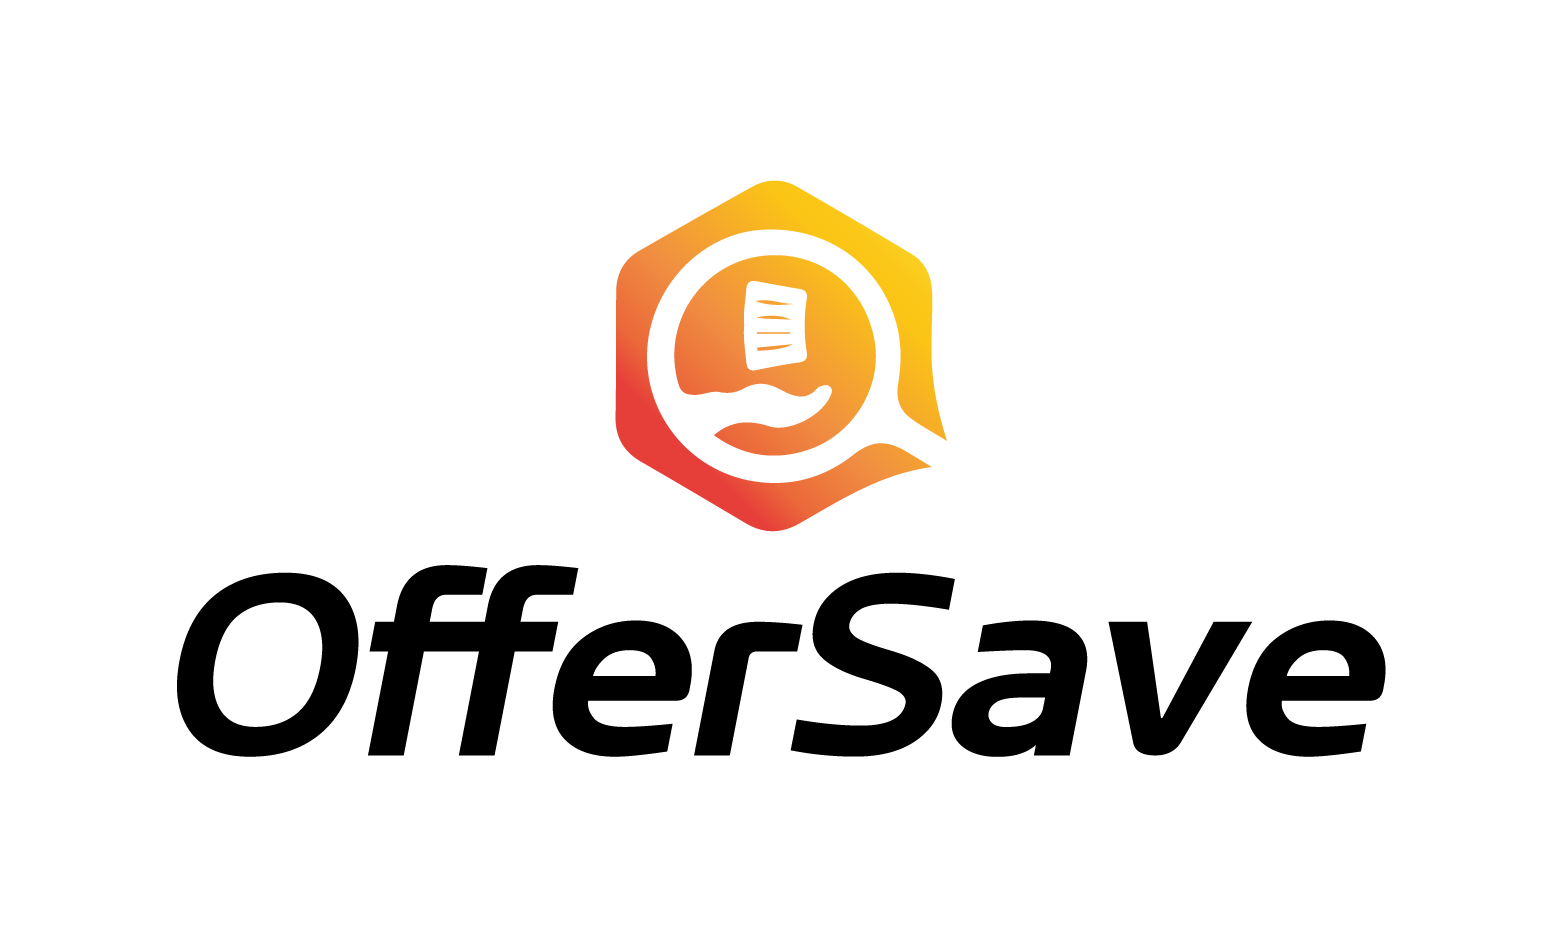 OfferSave.com - Creative brandable domain for sale